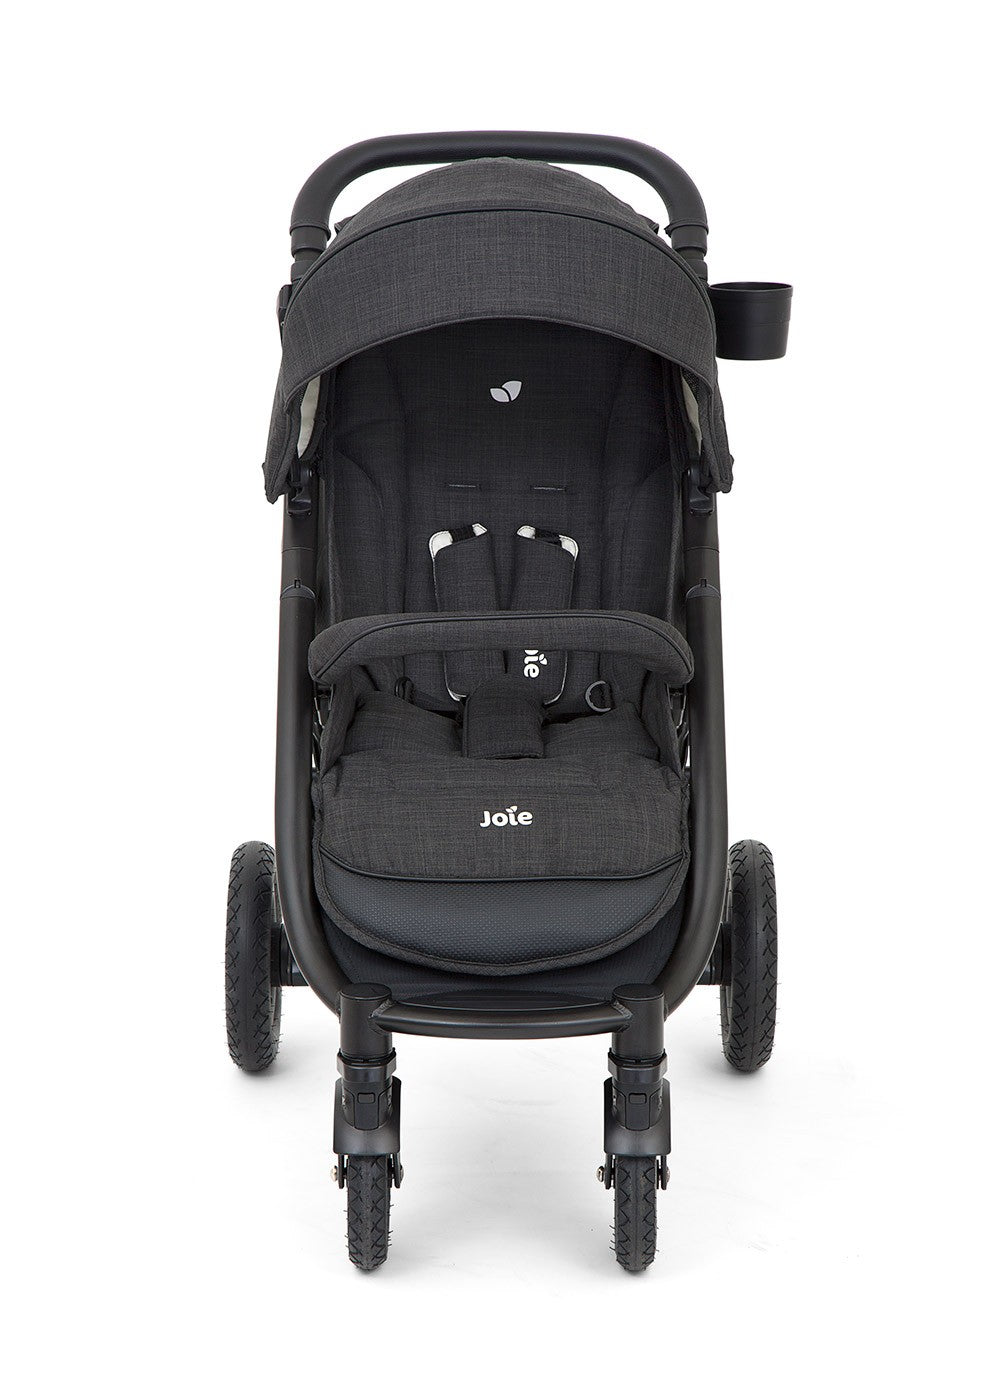 joie mytrax travel system price